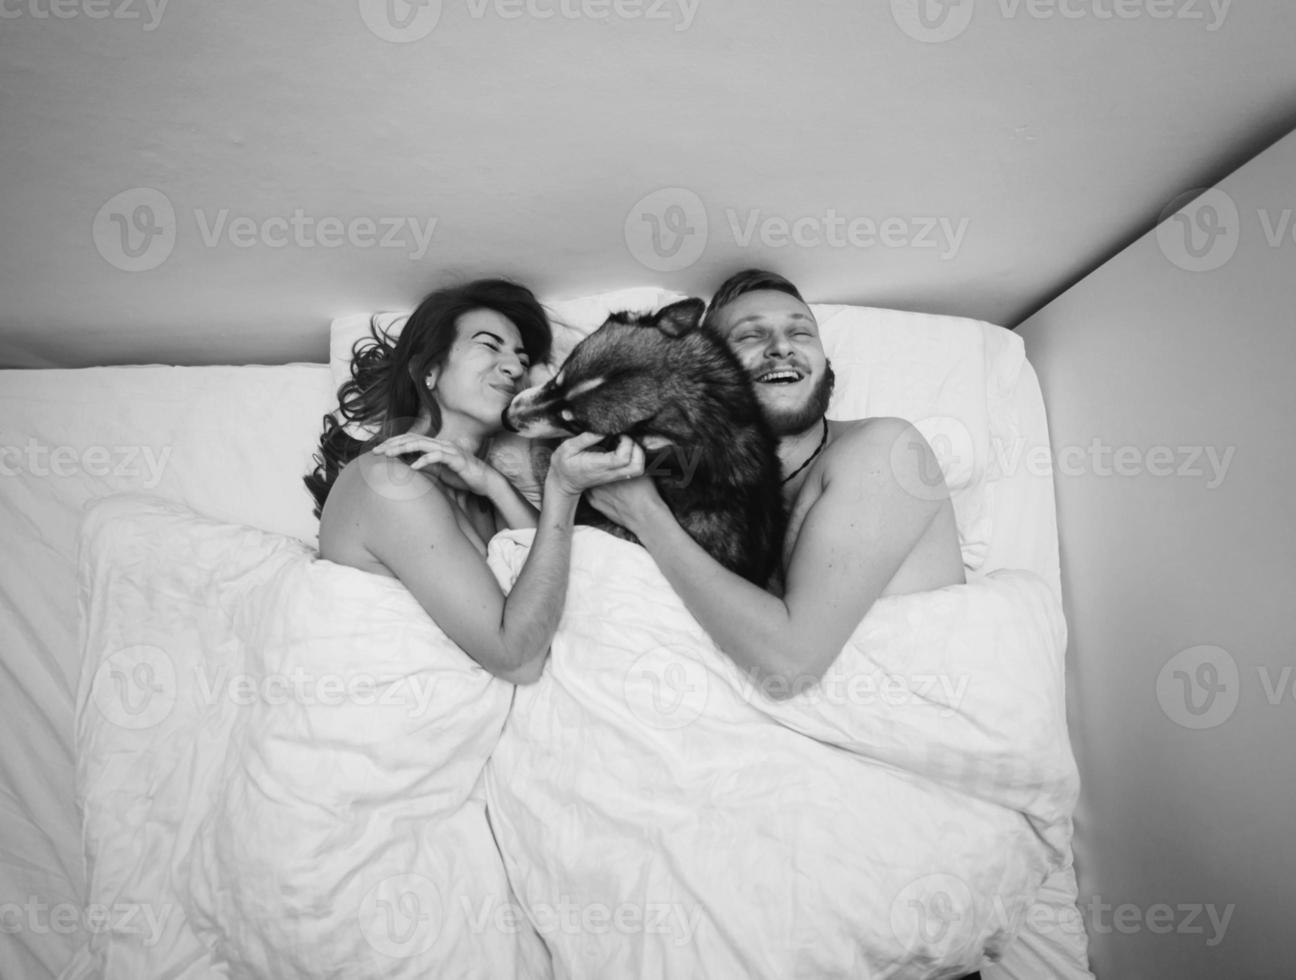 Young adult couple lying on bed photo